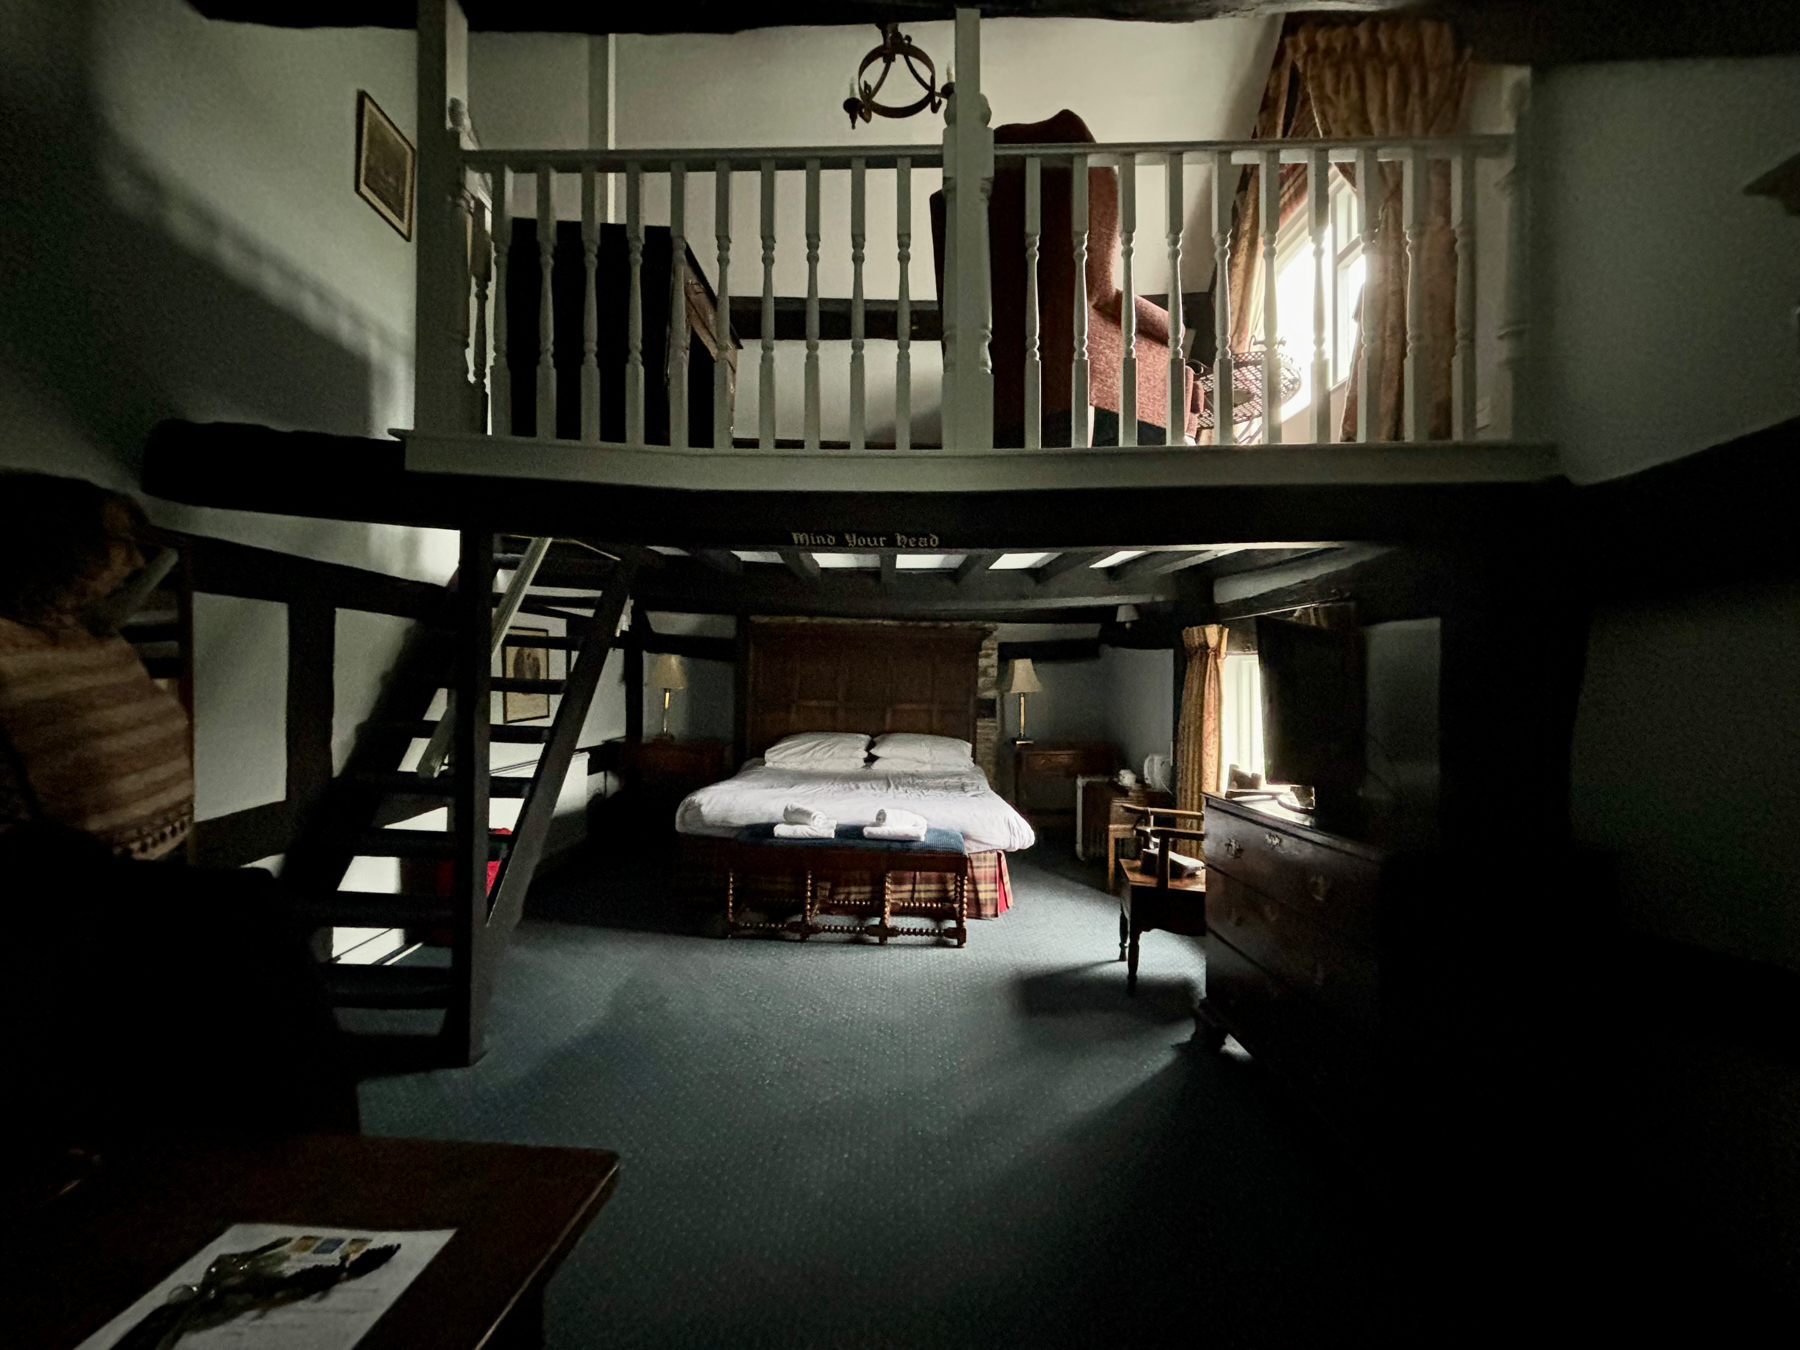 A dimly lit room featuring a traditional wooden loft with a ladder, a bed on the lower level, antique furniture including a dresser with a mirror, and a wicker trunk at the foot of the bed. Light filters in through a window